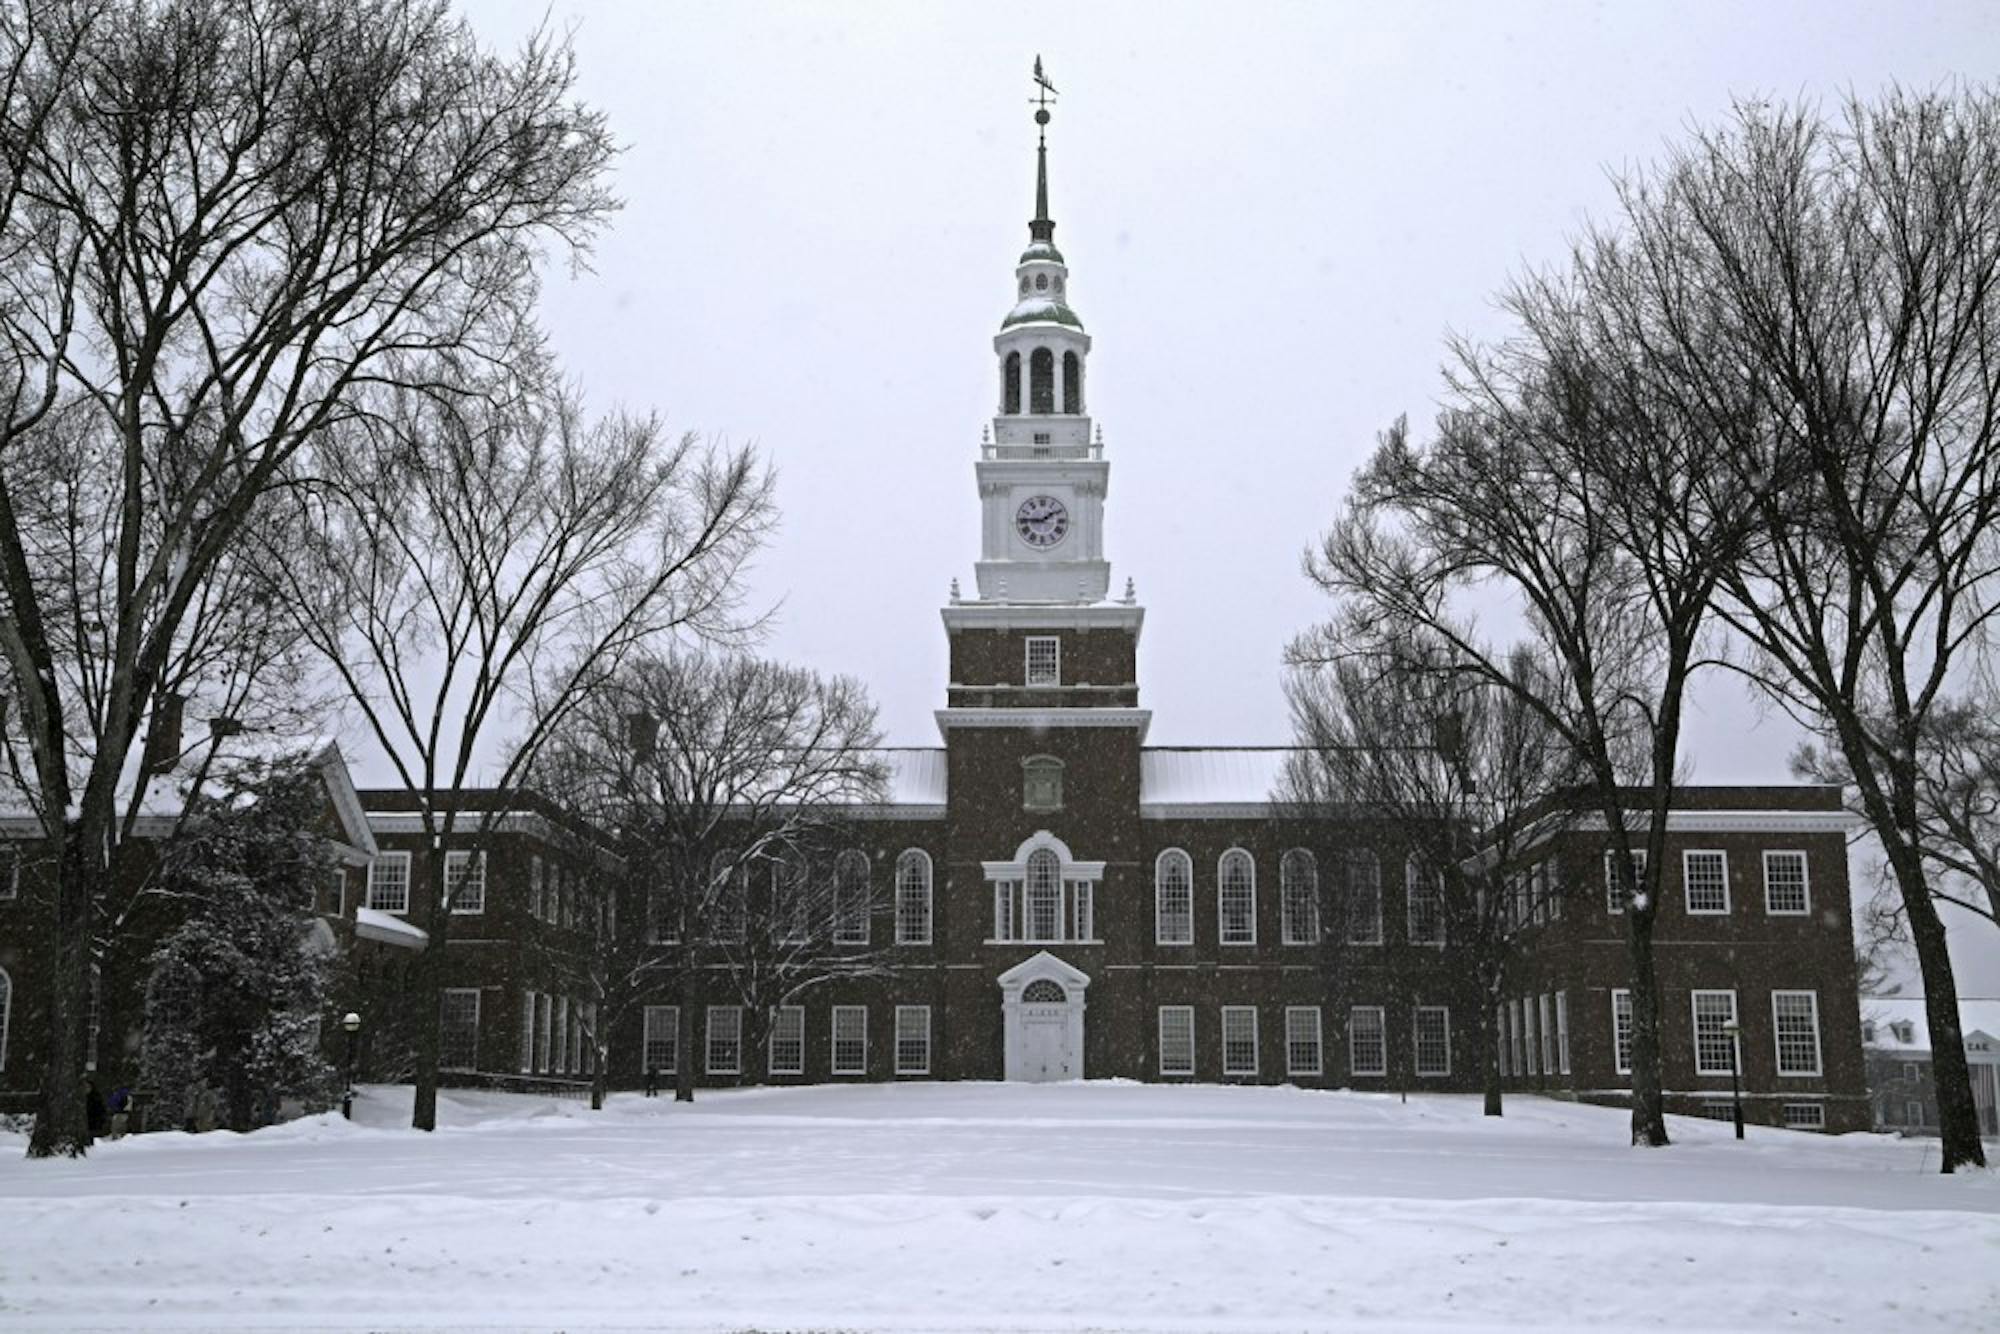 Administrators hope “Moving Dartmouth Forward” changes will create an intellectual campus environment. 